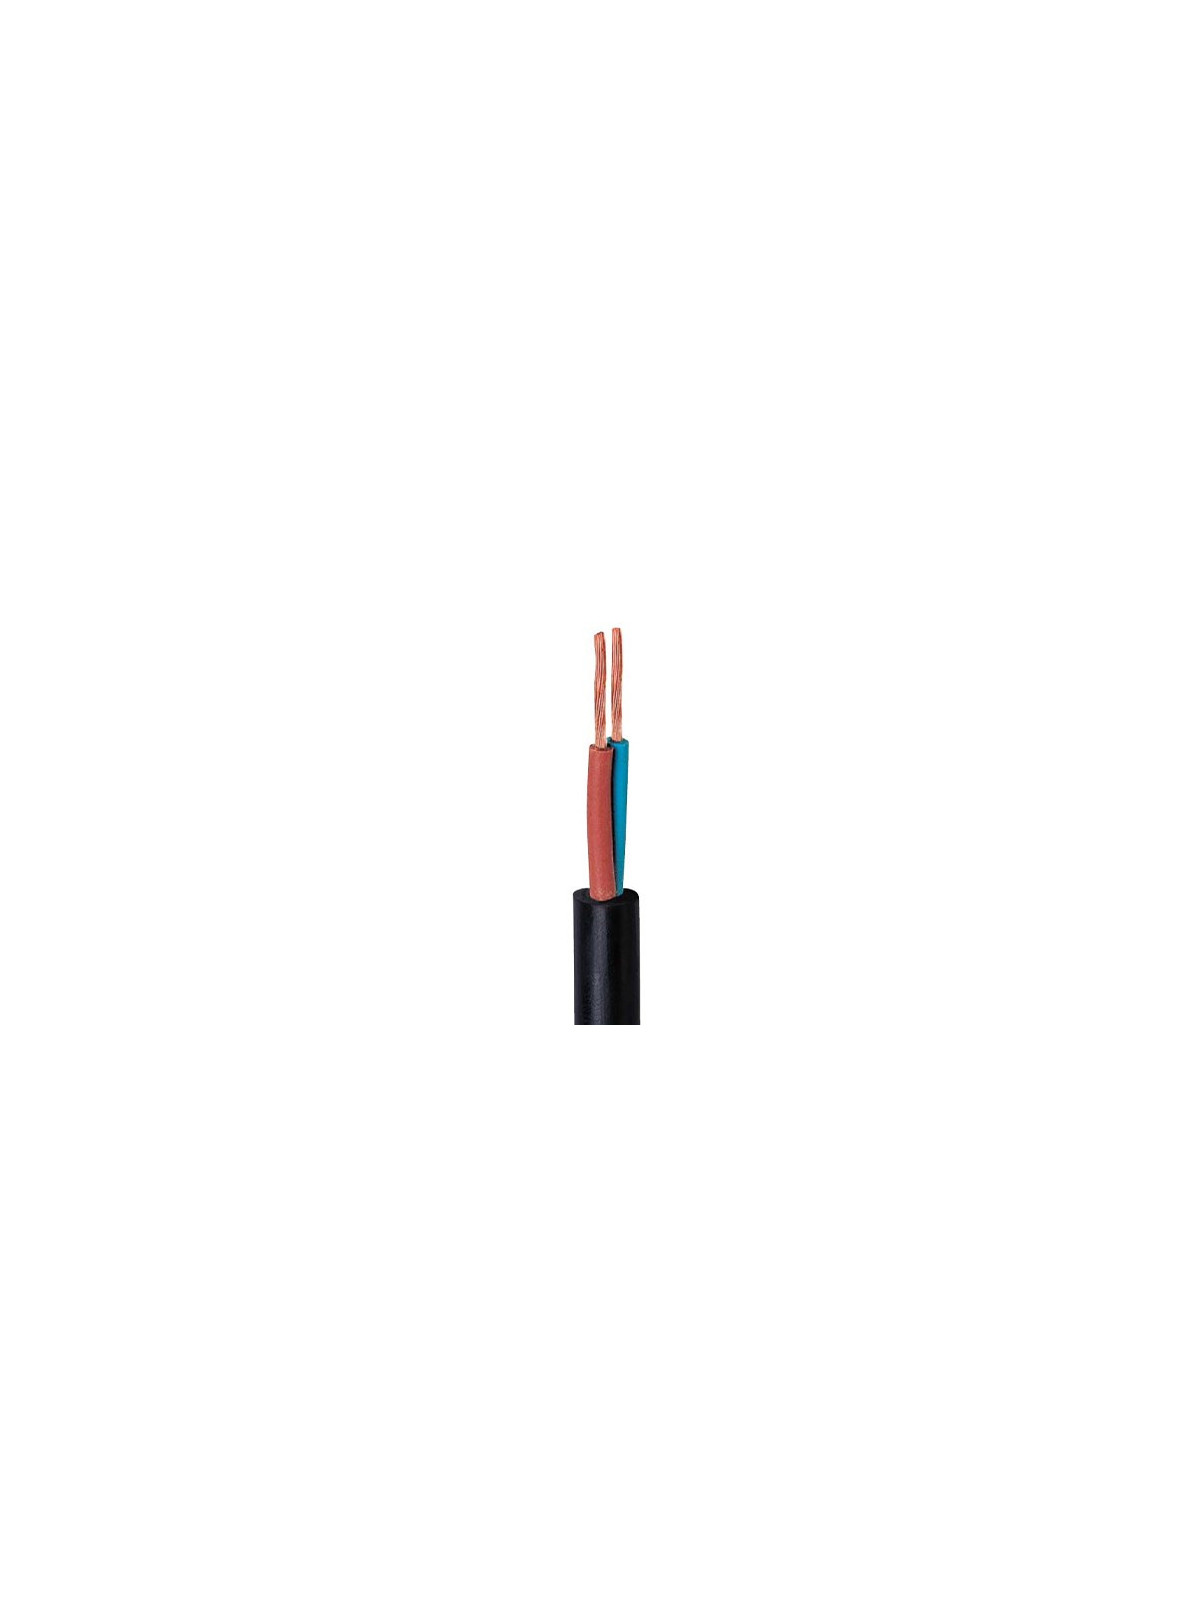 flexible cable H05RR-F 2x0,75mm² - 1m